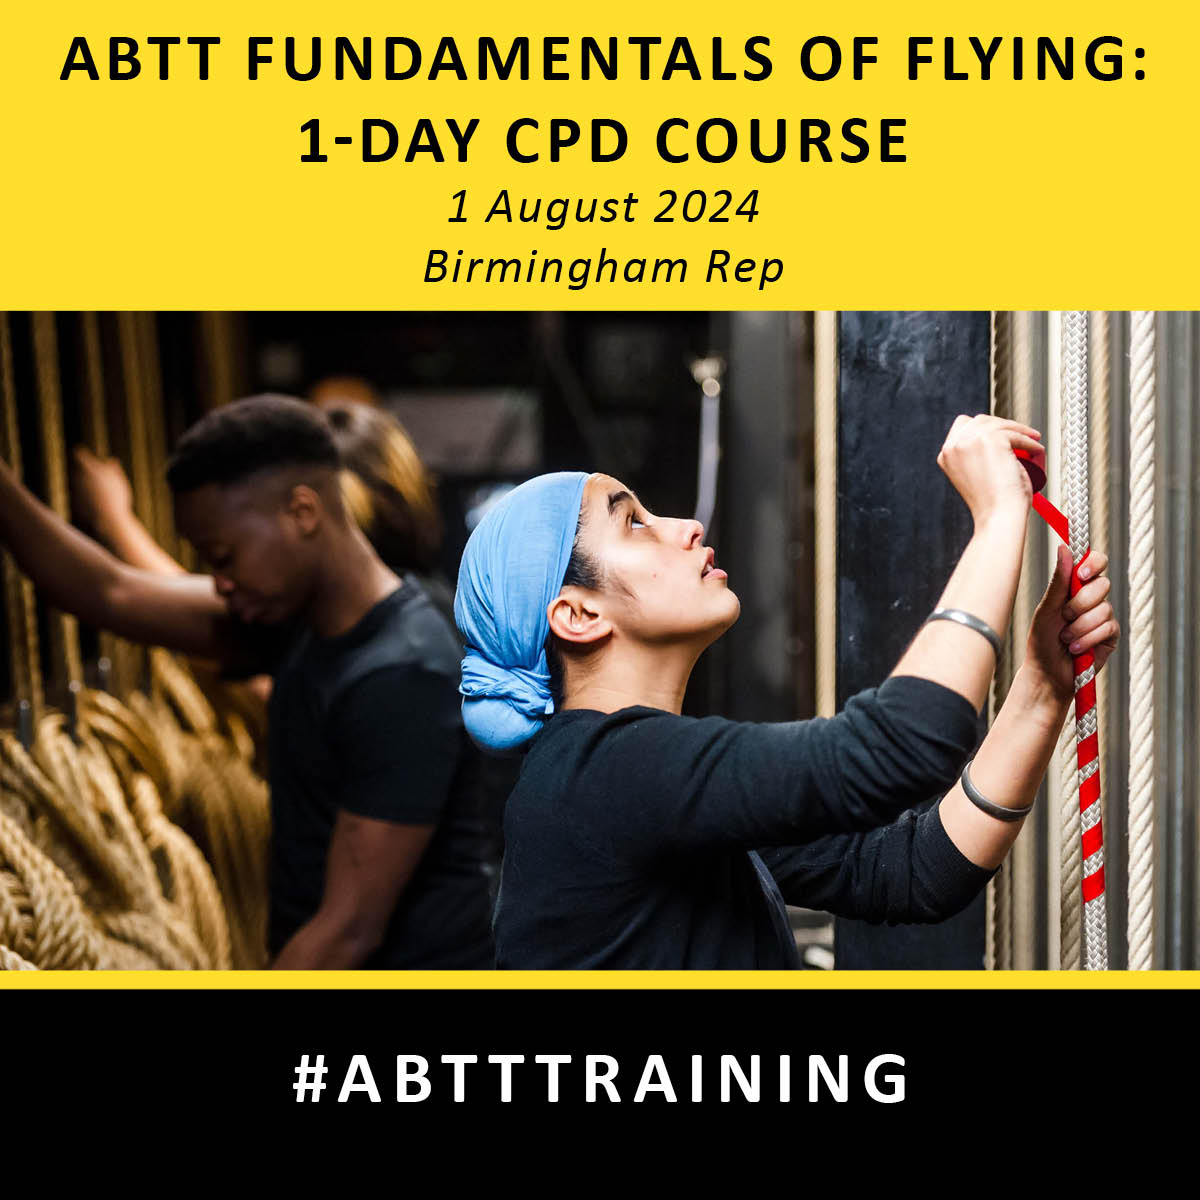 NOW BOOKING- One-day CPD Course: ABTT Fundamentals of Flying - Birmingham Rep - 1st August, 2024.

The course covers the safe handling of counterweight sets & hemp, knots in practice, & many other methods of hanging.

Book here now: abtt.org.uk/events/one-day…

#ABTTTraining